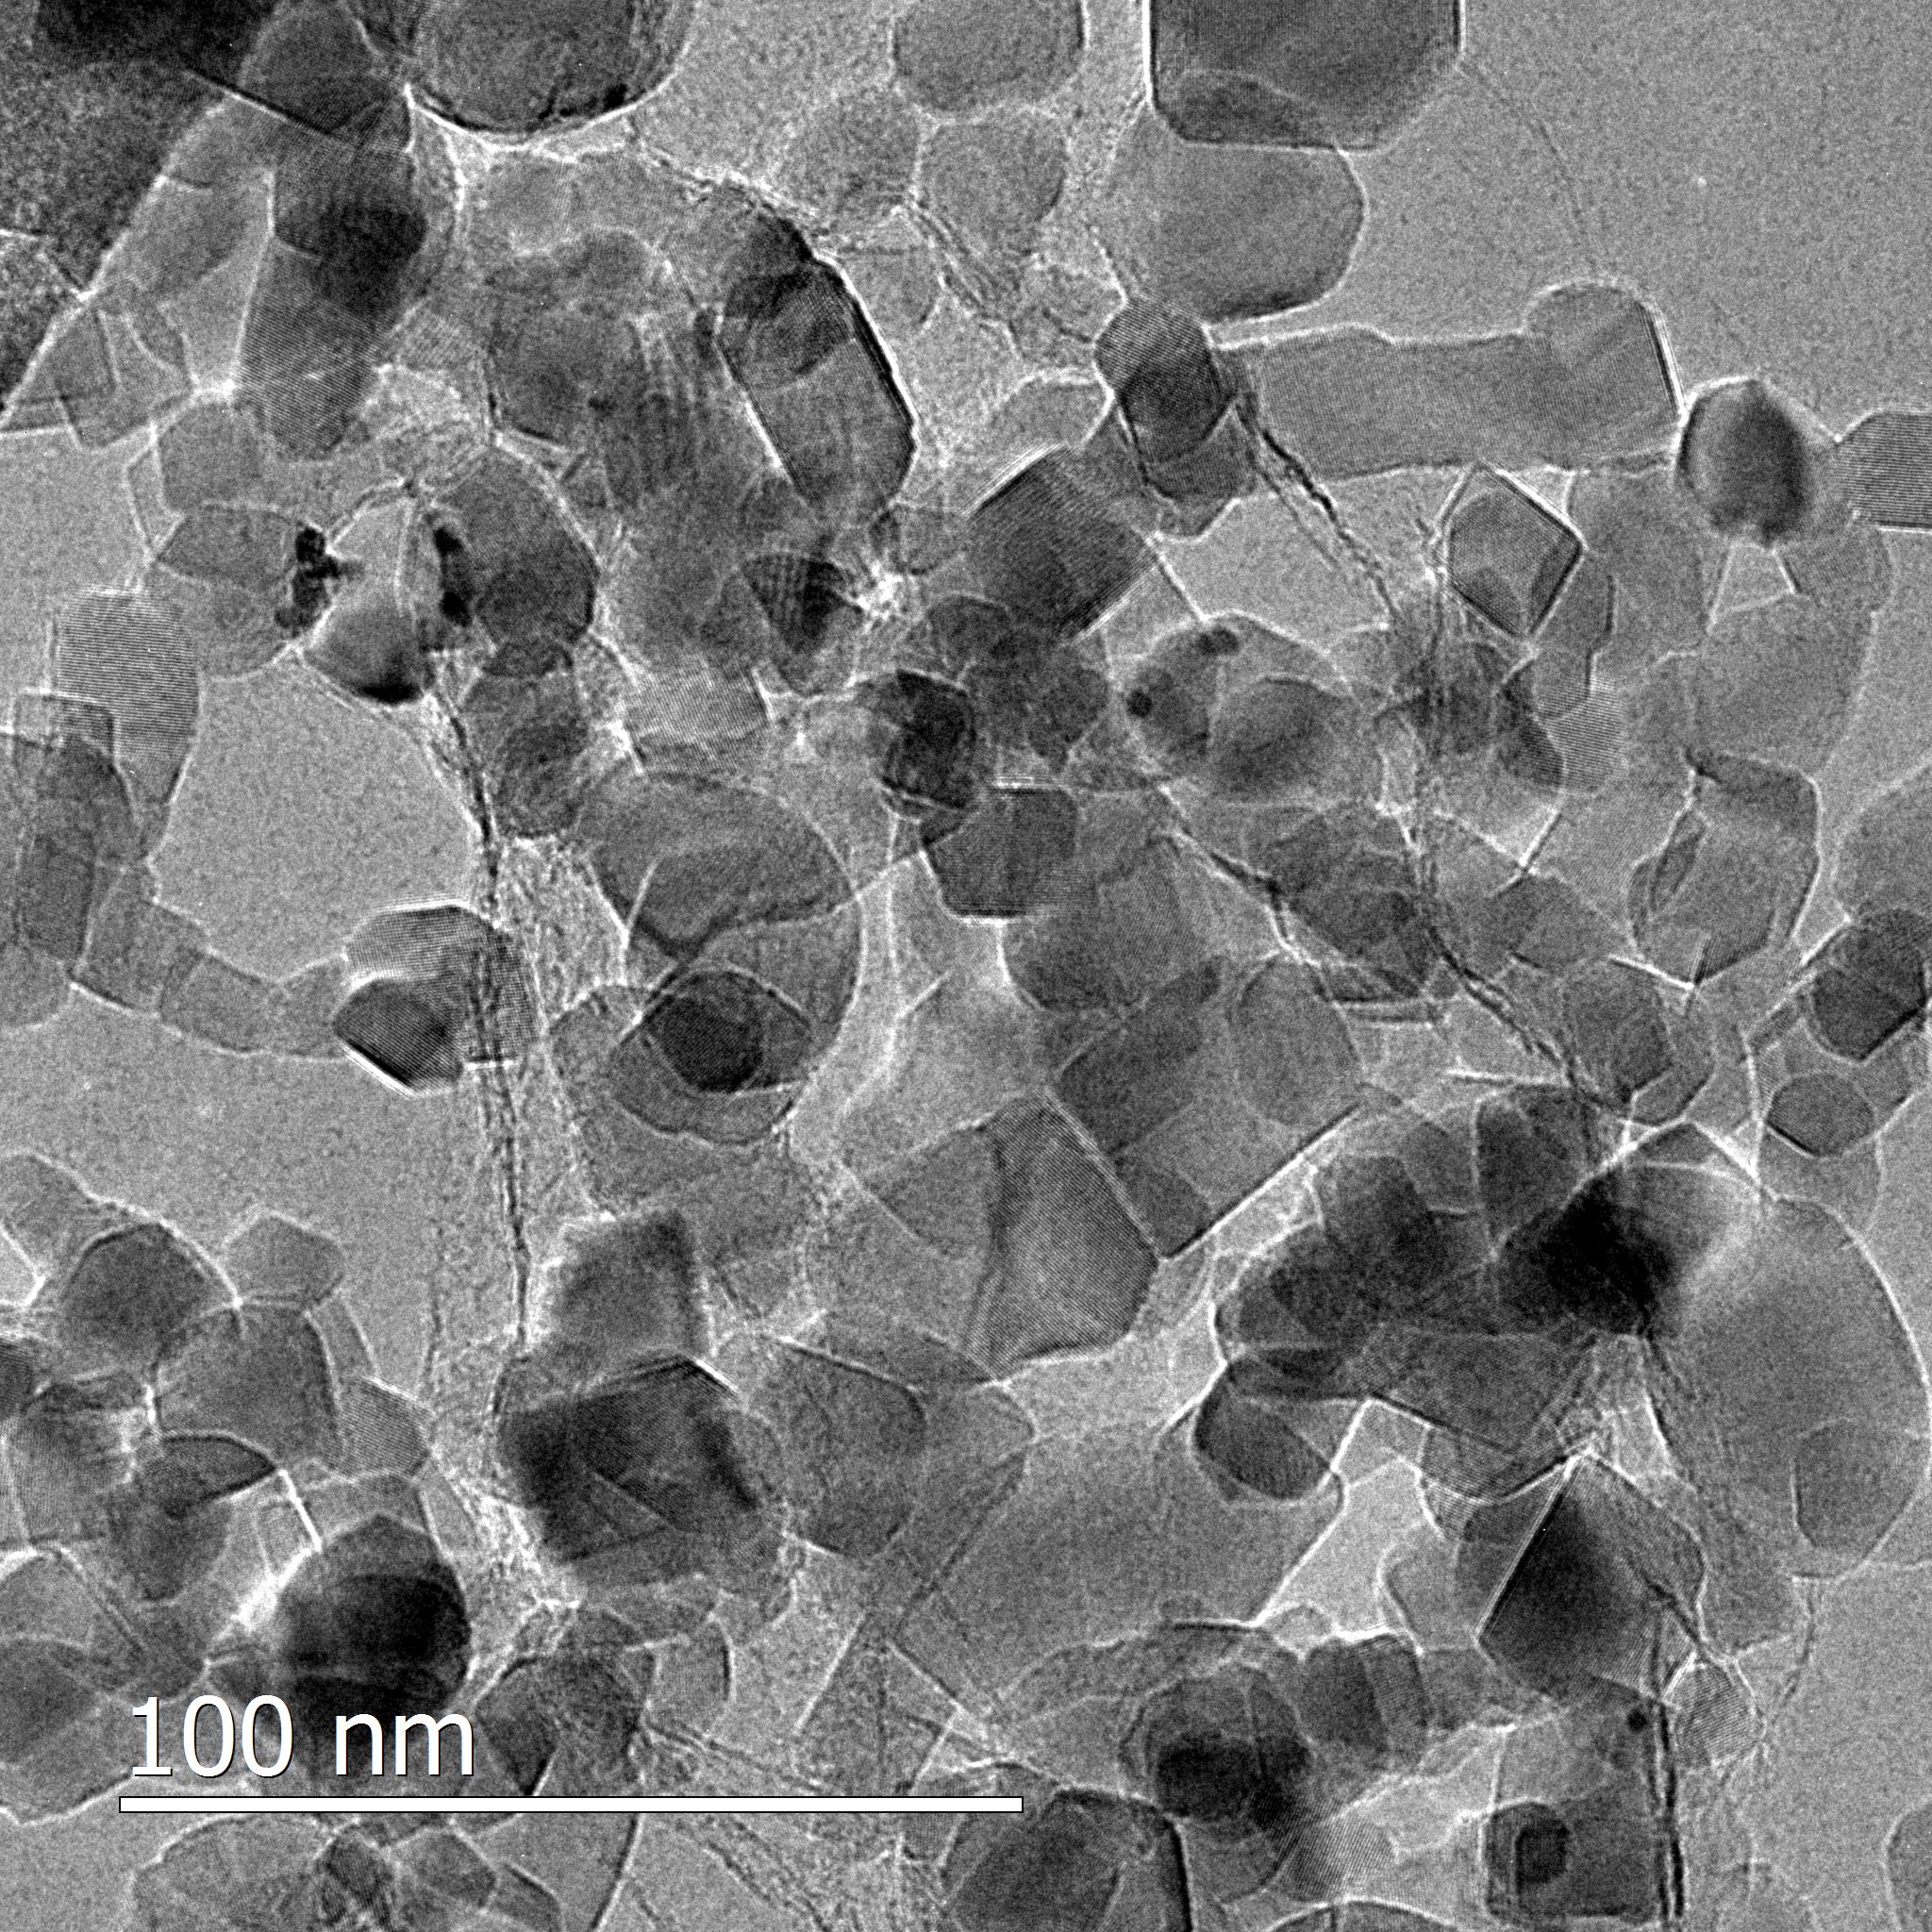 A transmission electron microscopic image of titanium dioxide plates resting on a near-invisible sheet of graphene.